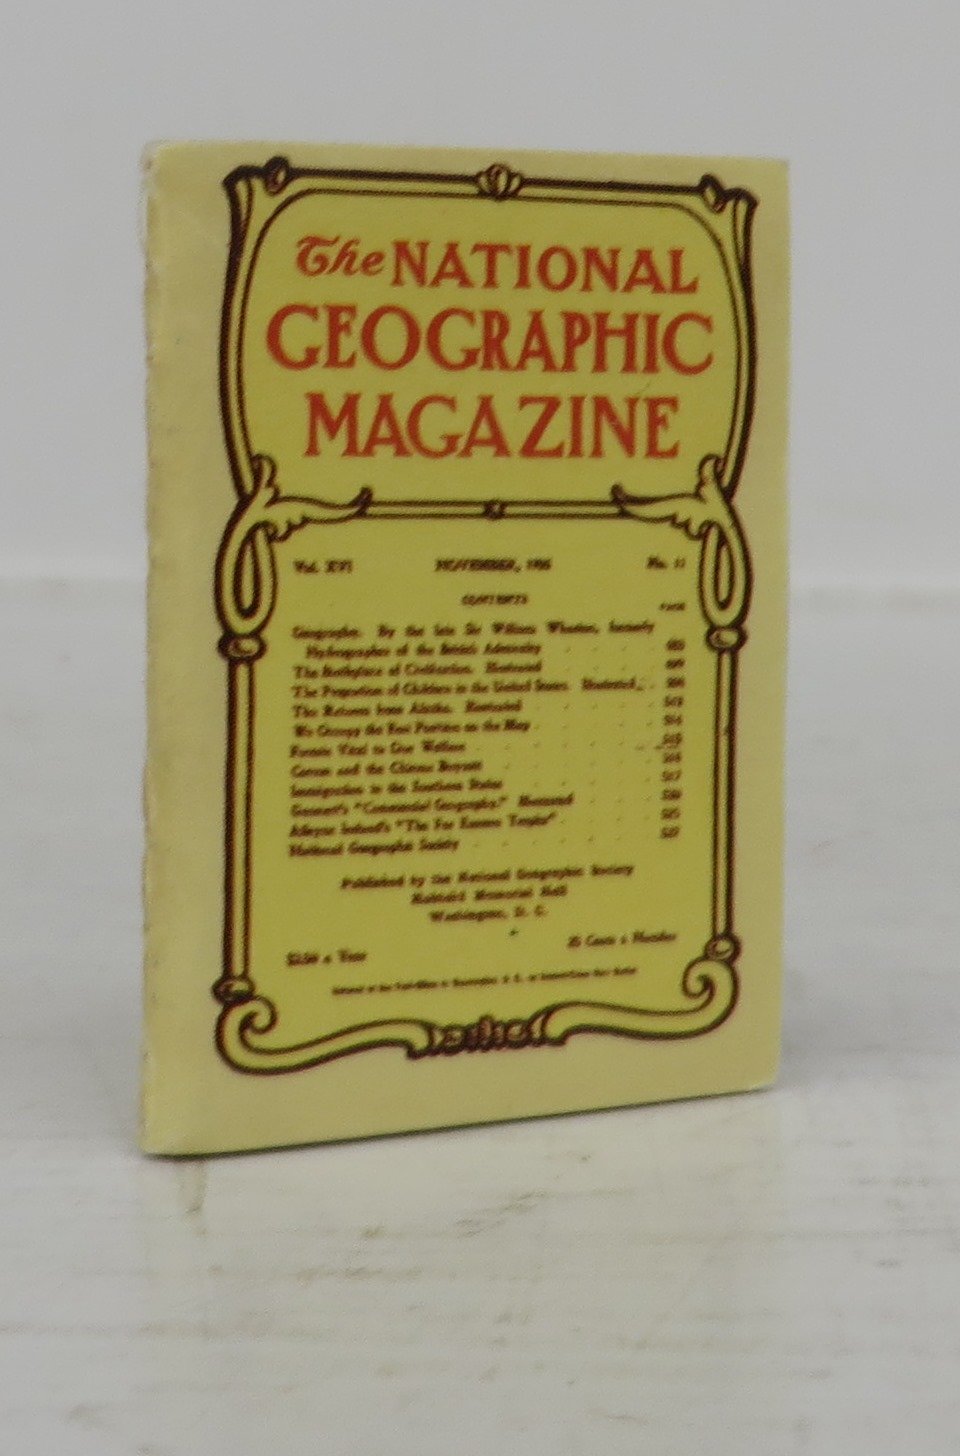 The National Geographic Magazine (Miniature book)